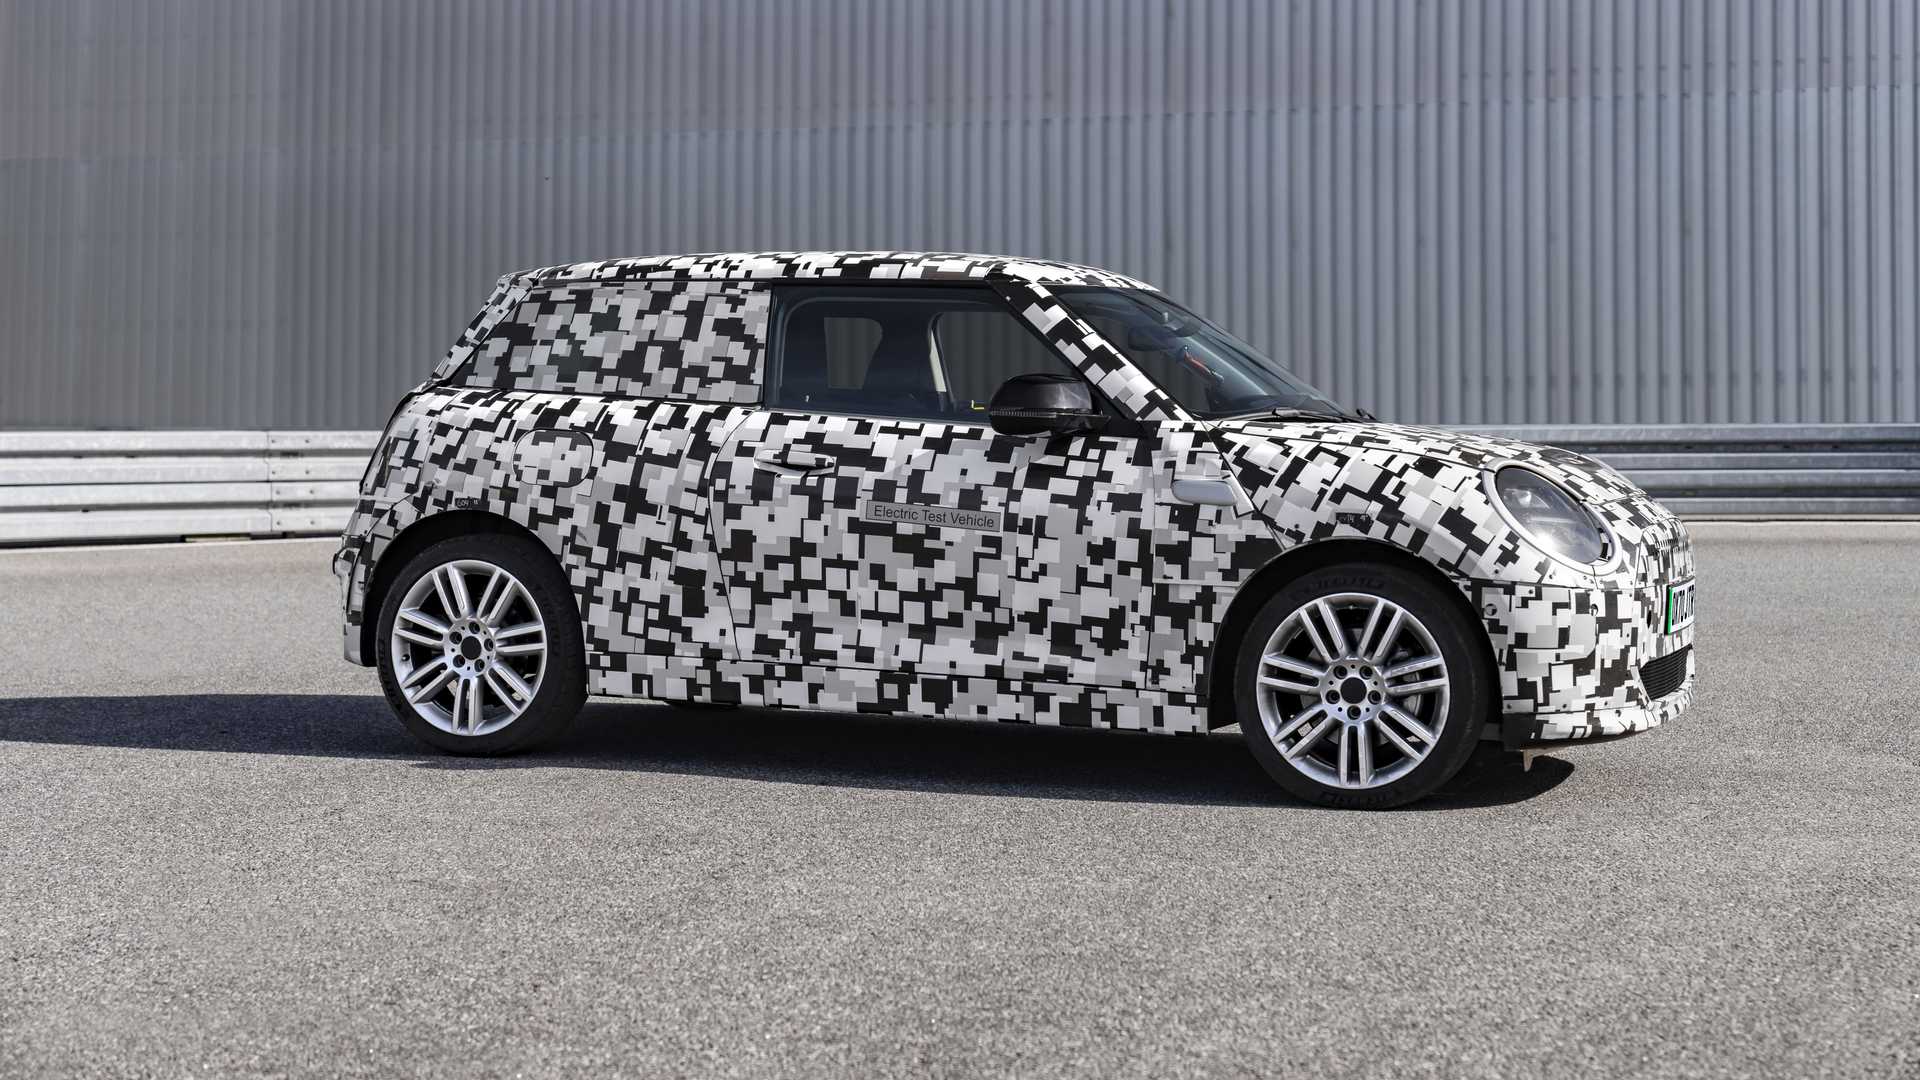 The fourth generation of the MINI Hatch has already been seen